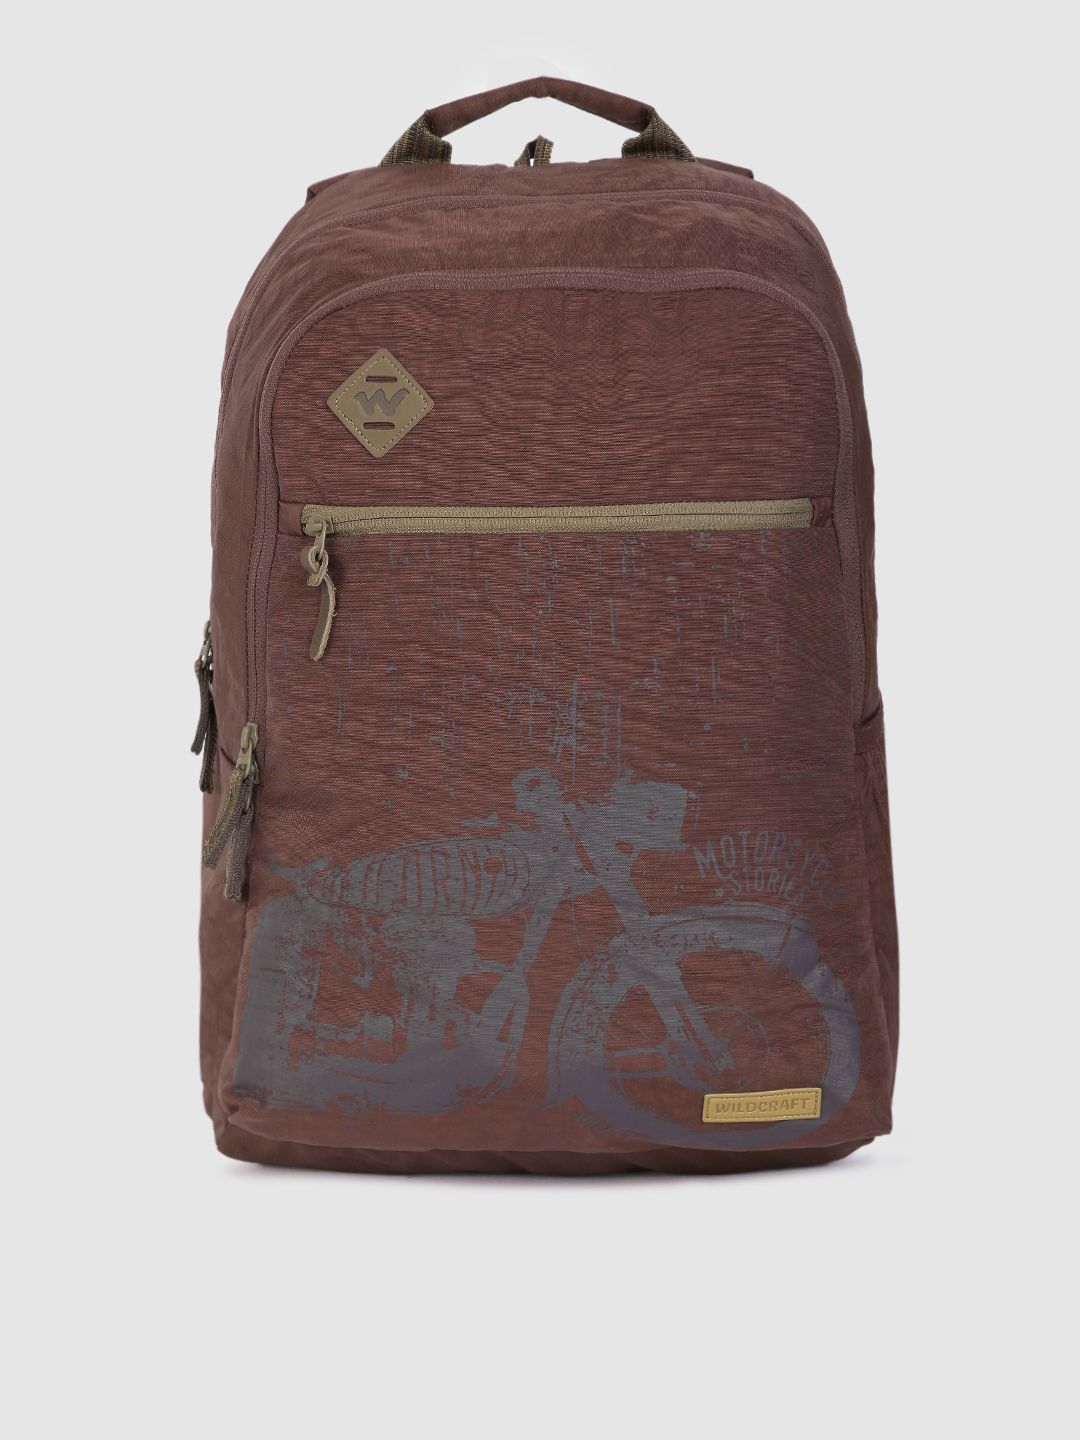 Wildcraft Unisex Maroon Graphic Printed Storm1 Backpack Price in India